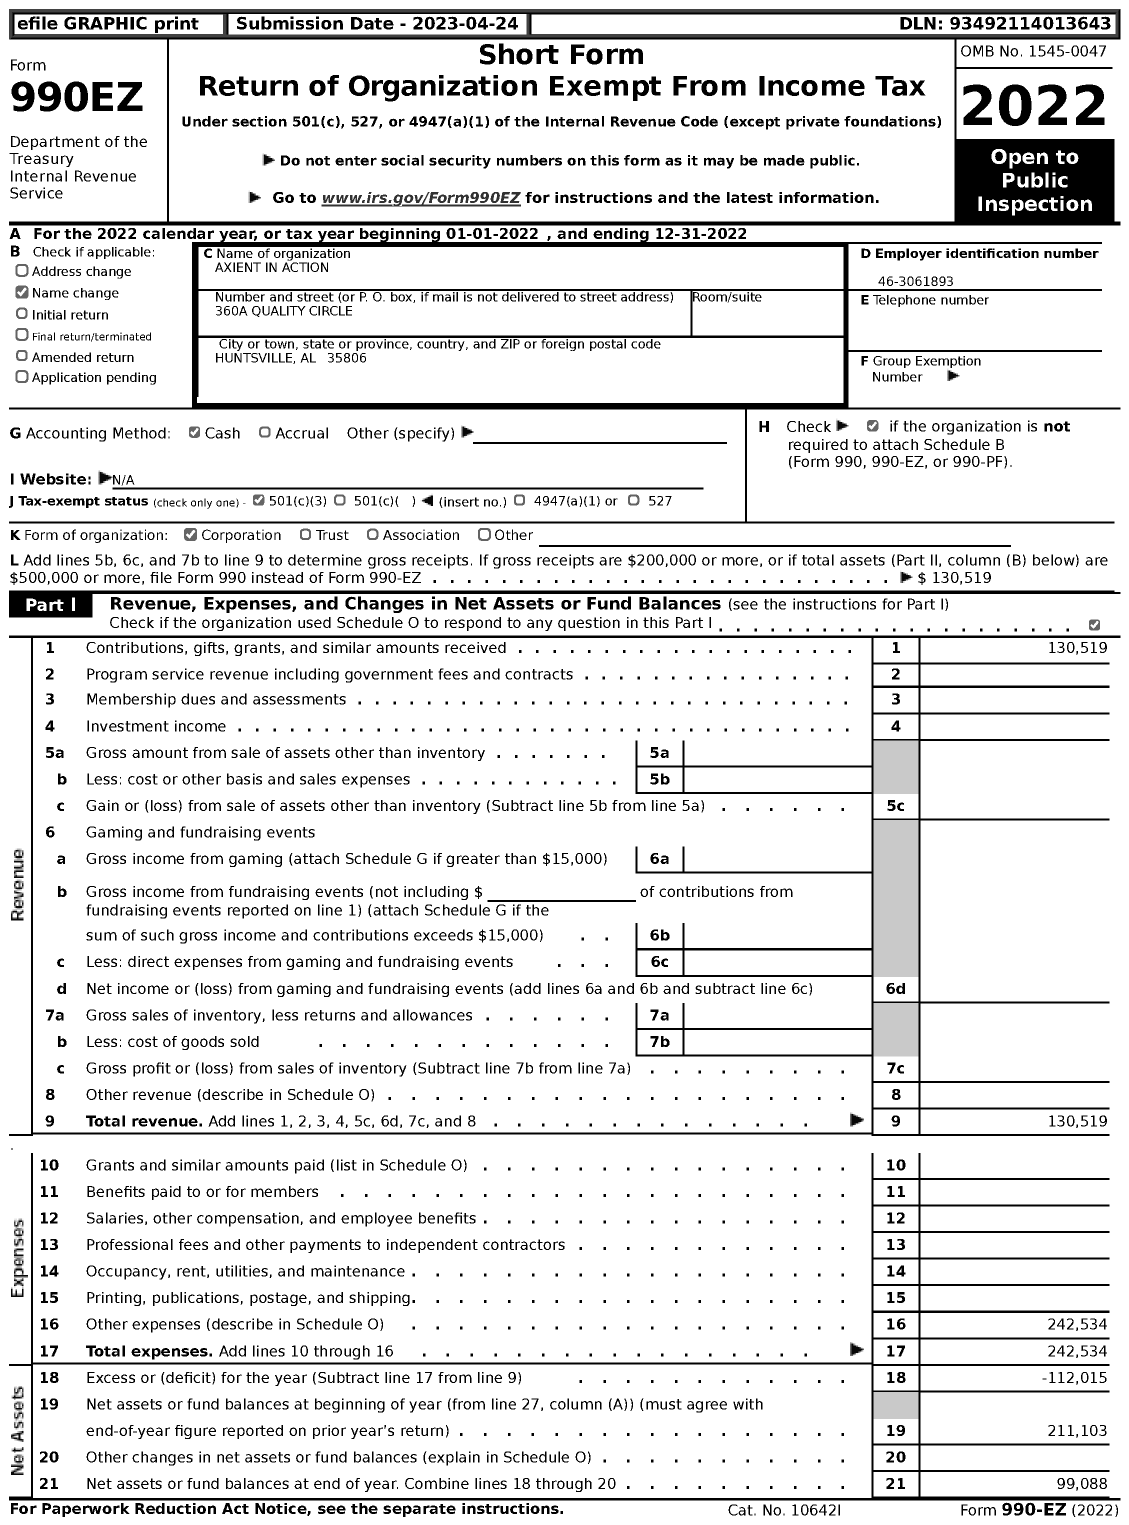 Image of first page of 2022 Form 990EZ for Axient in Action